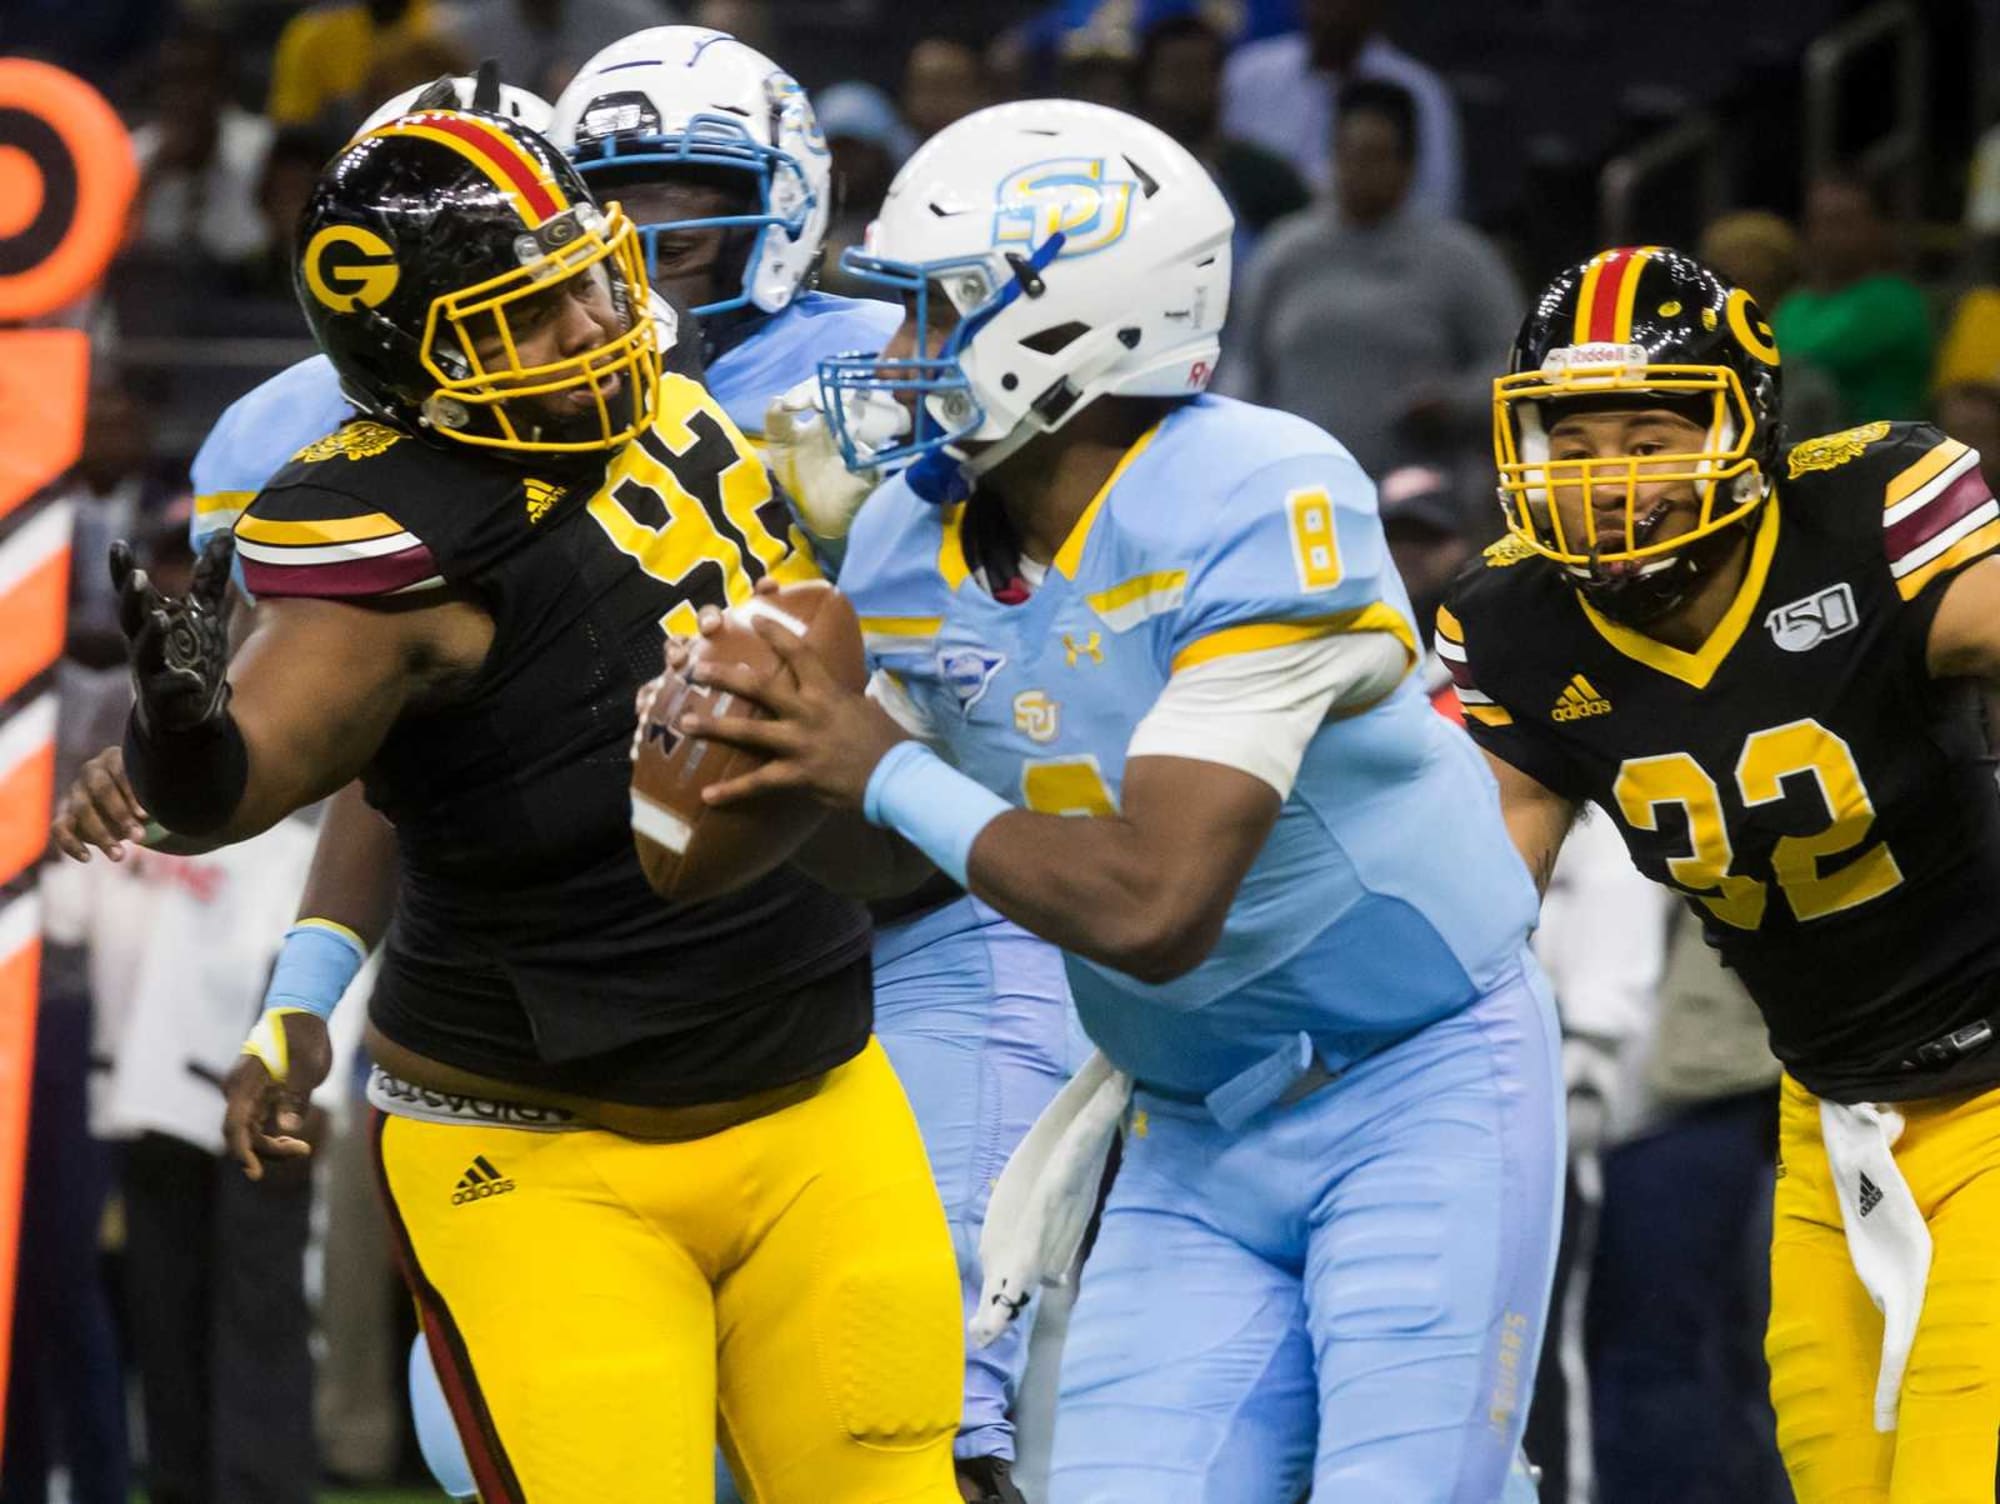 HBCU Football 3 takeaways from Southern's rout of Grambling